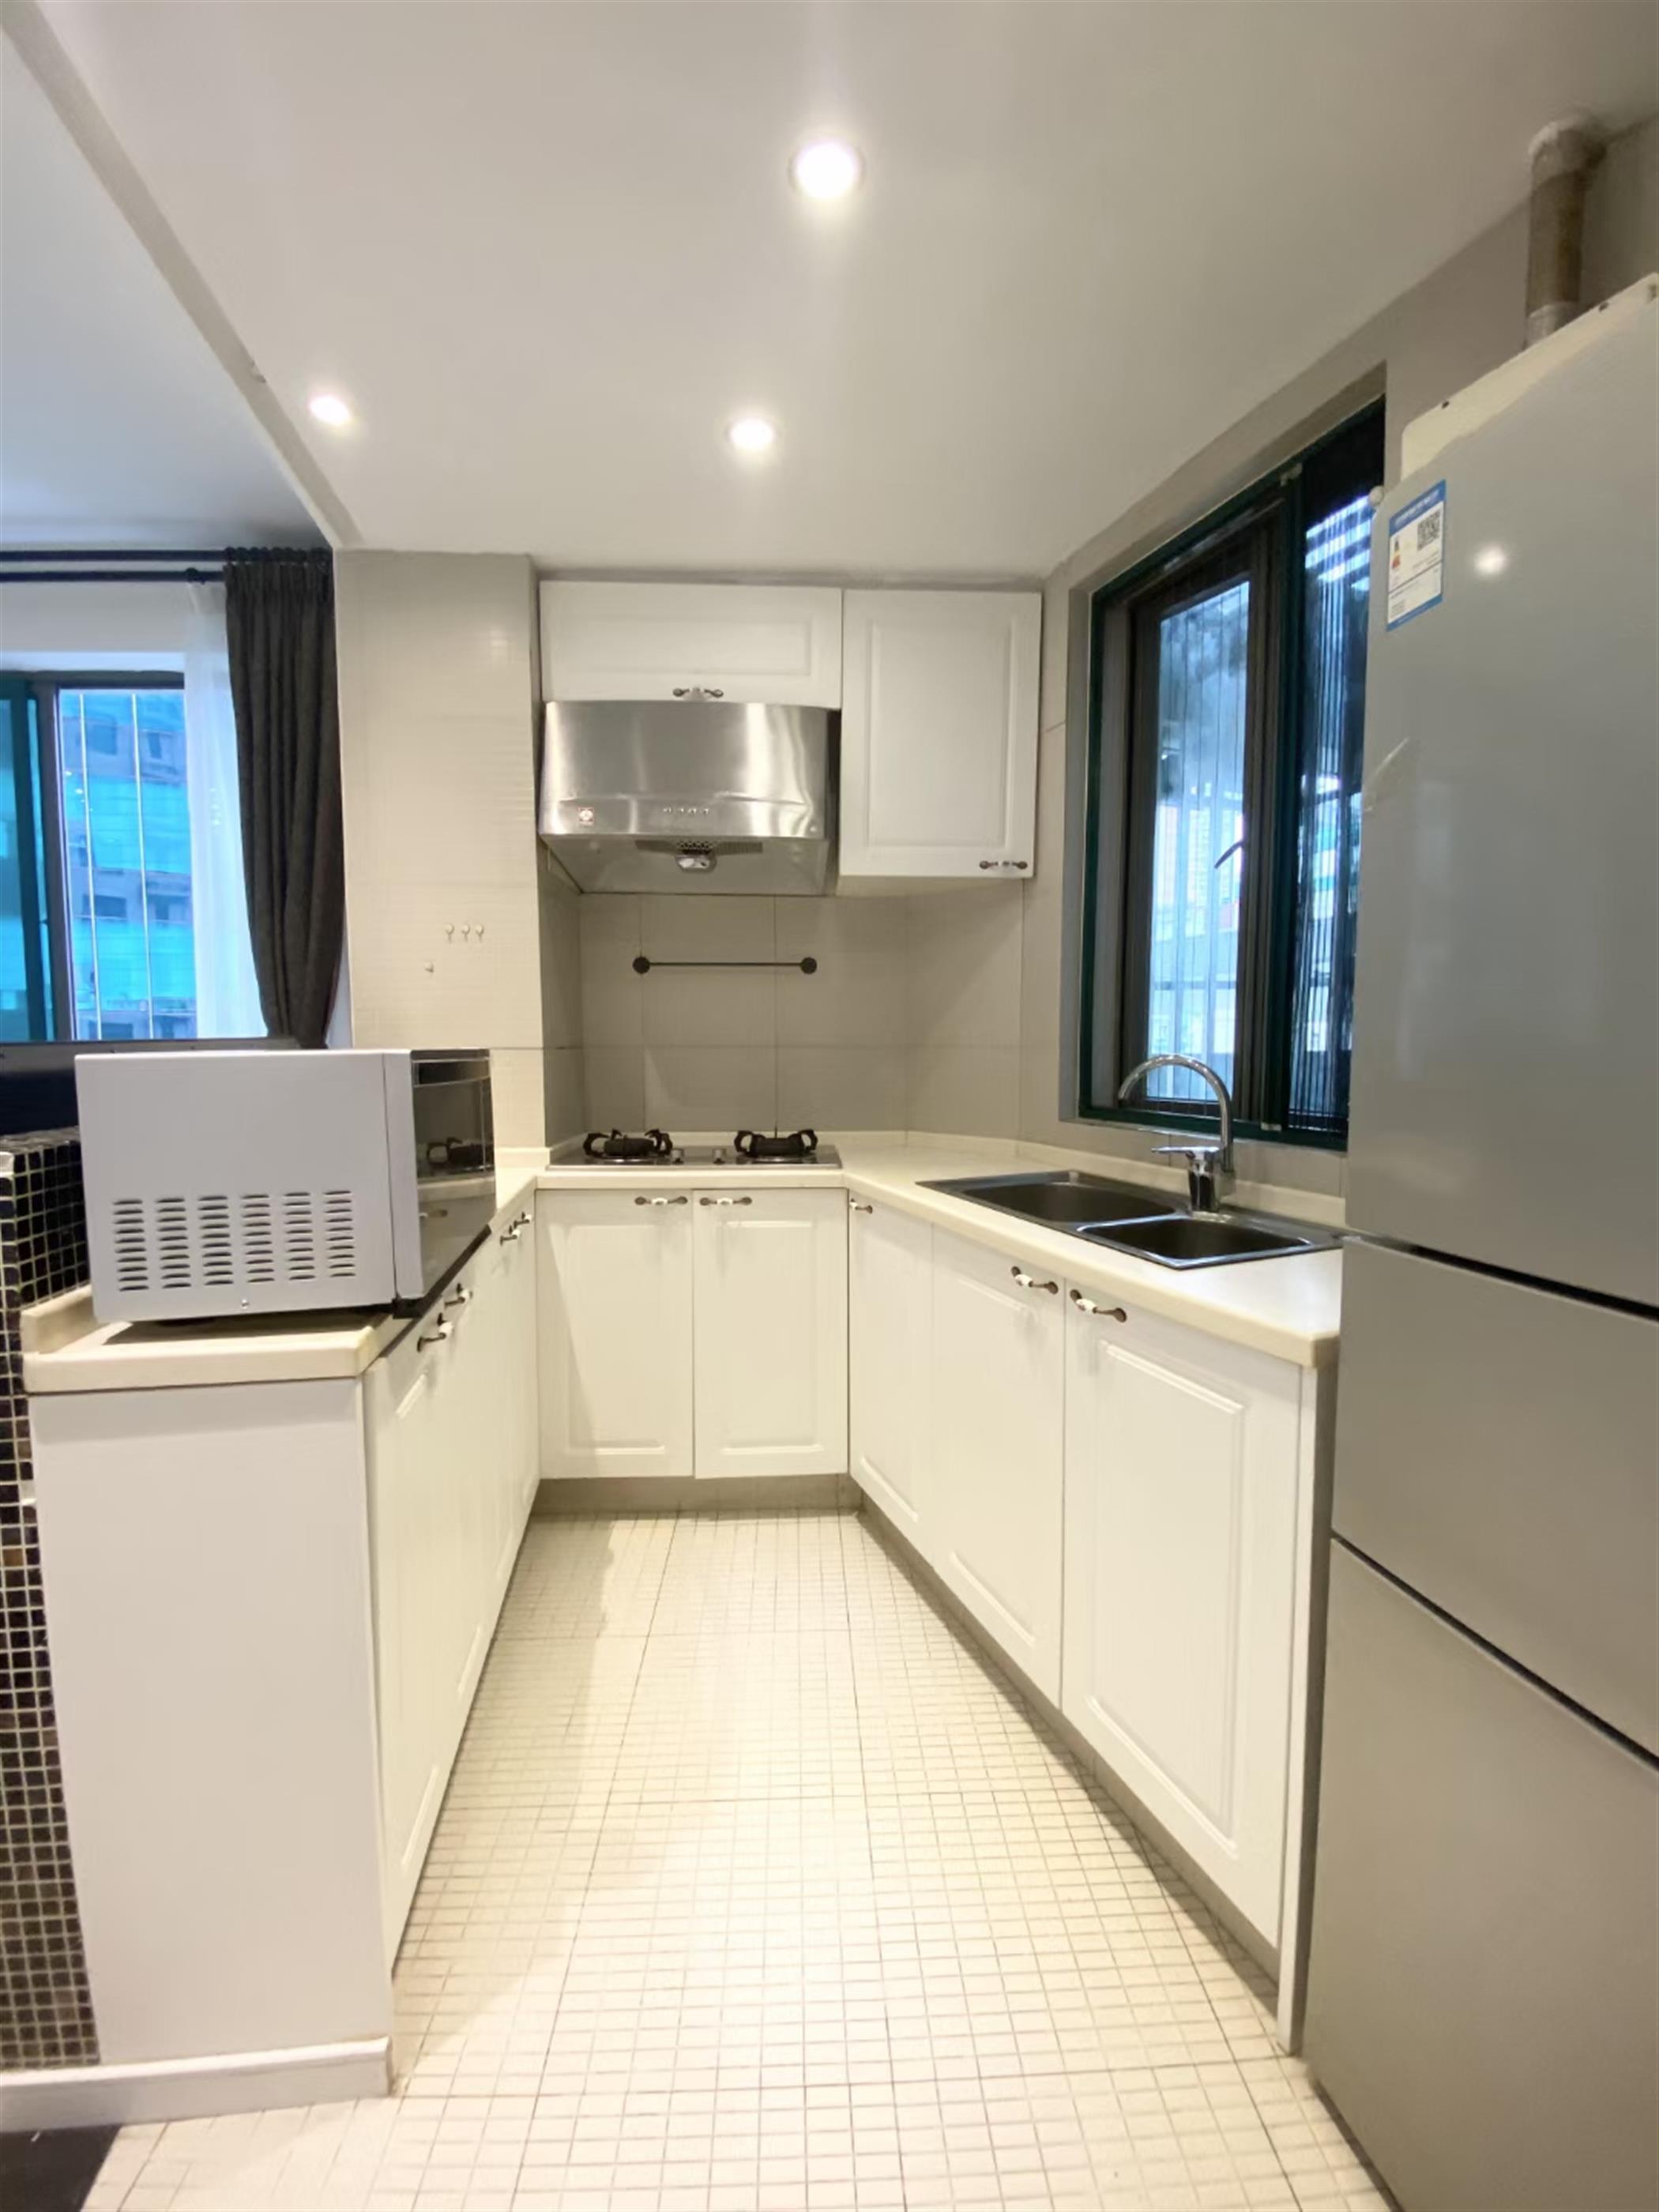 New Kitchen Appliances Spacious Newly Renovated 2BR Top of City Apt Nr Ln 2/12/13 for Rent in Shanghai